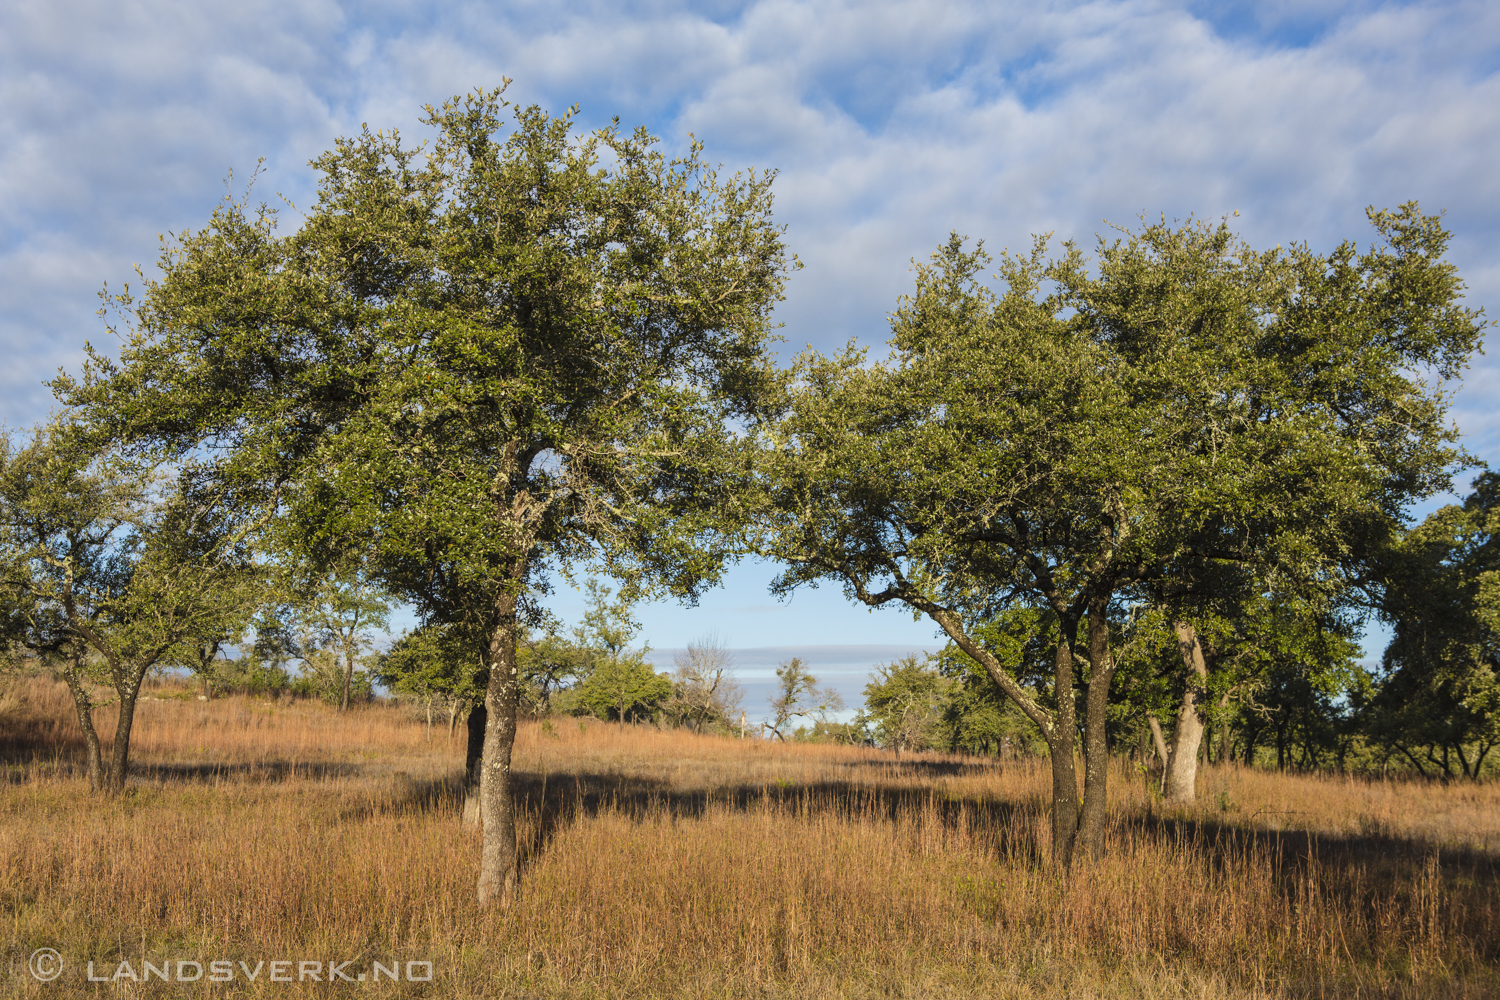 Texas Hill Country. 

(Canon EOS 5D Mark III / Canon EF 24-70mm f/2.8 L USM